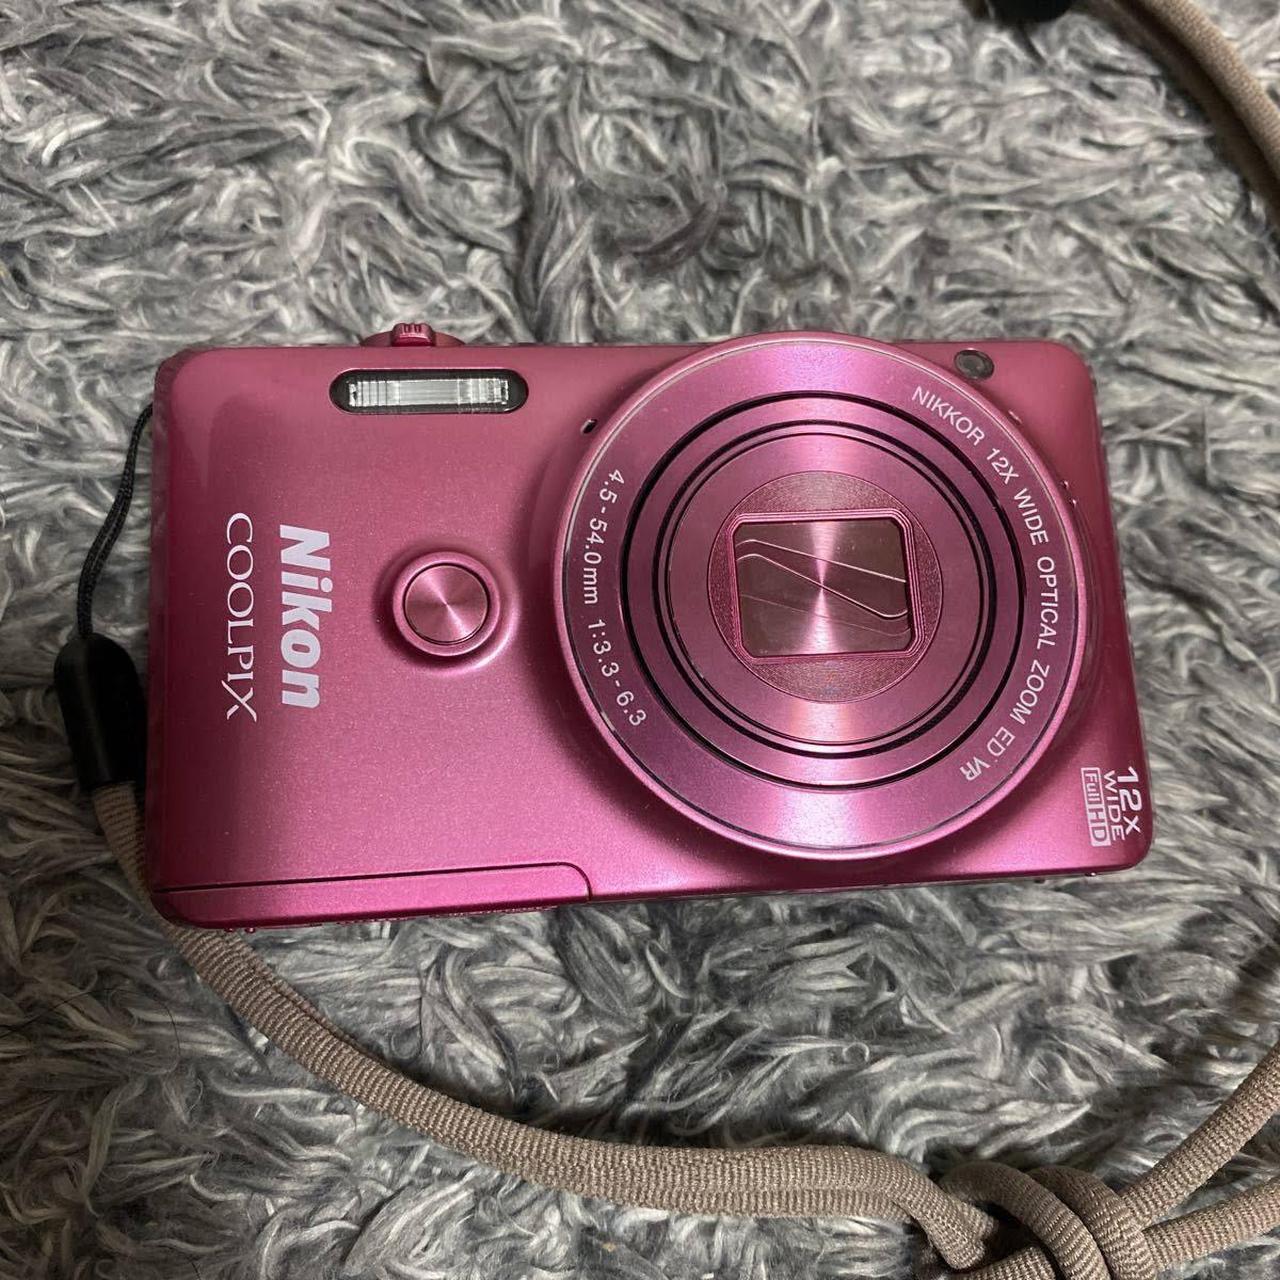 Nikon Coolpix S6900, I AM NOT SELLING. I AM LOOKING